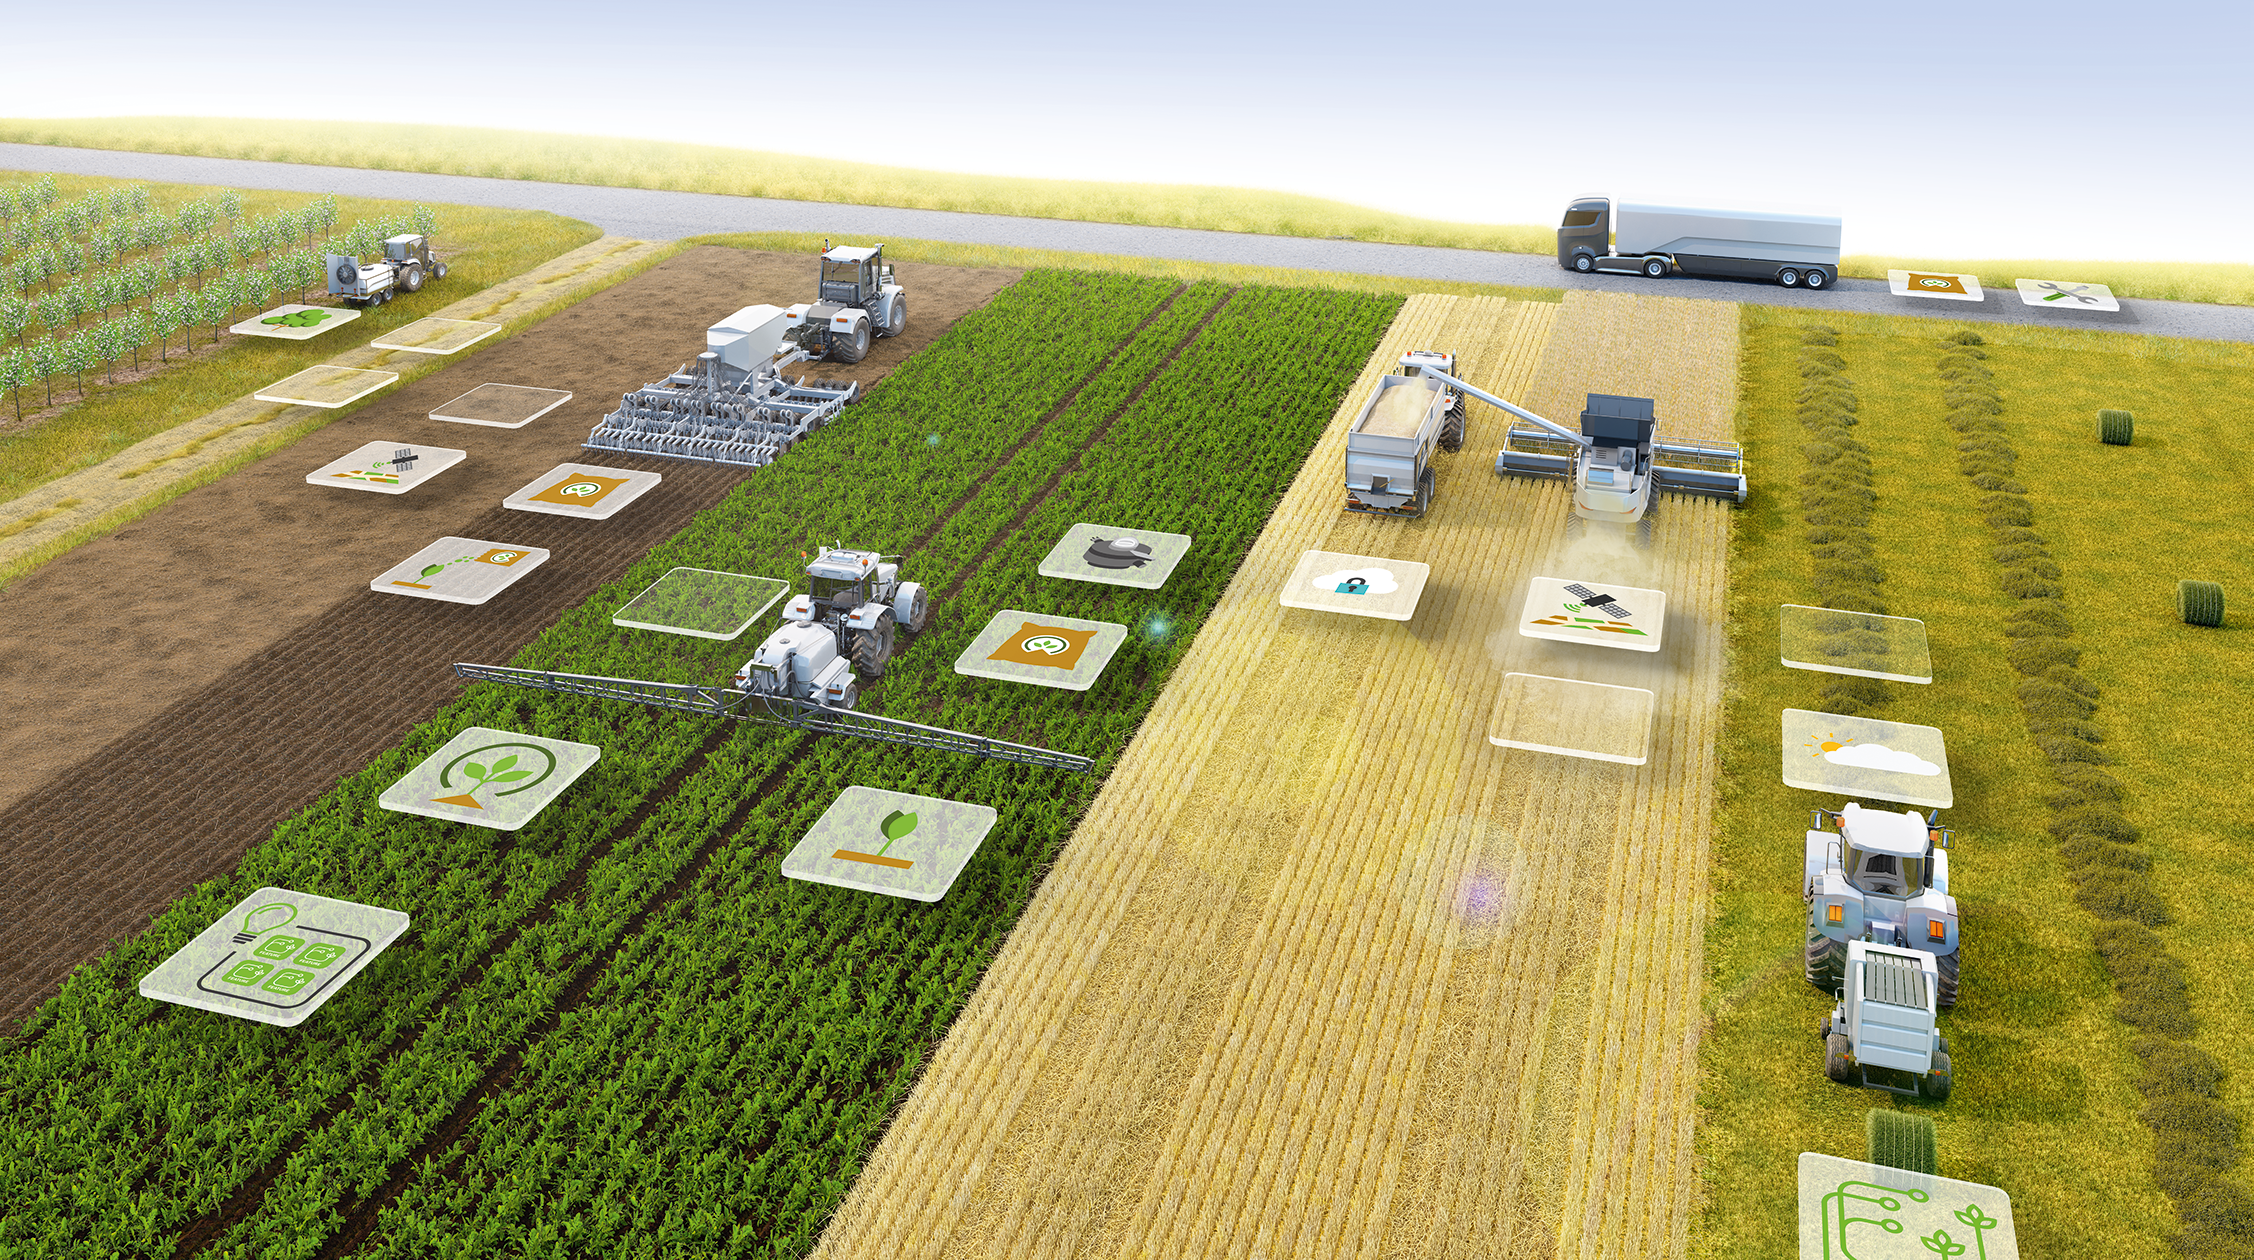 NEVONEX powered by Bosch: The ecosystem for smart, digital agriculture